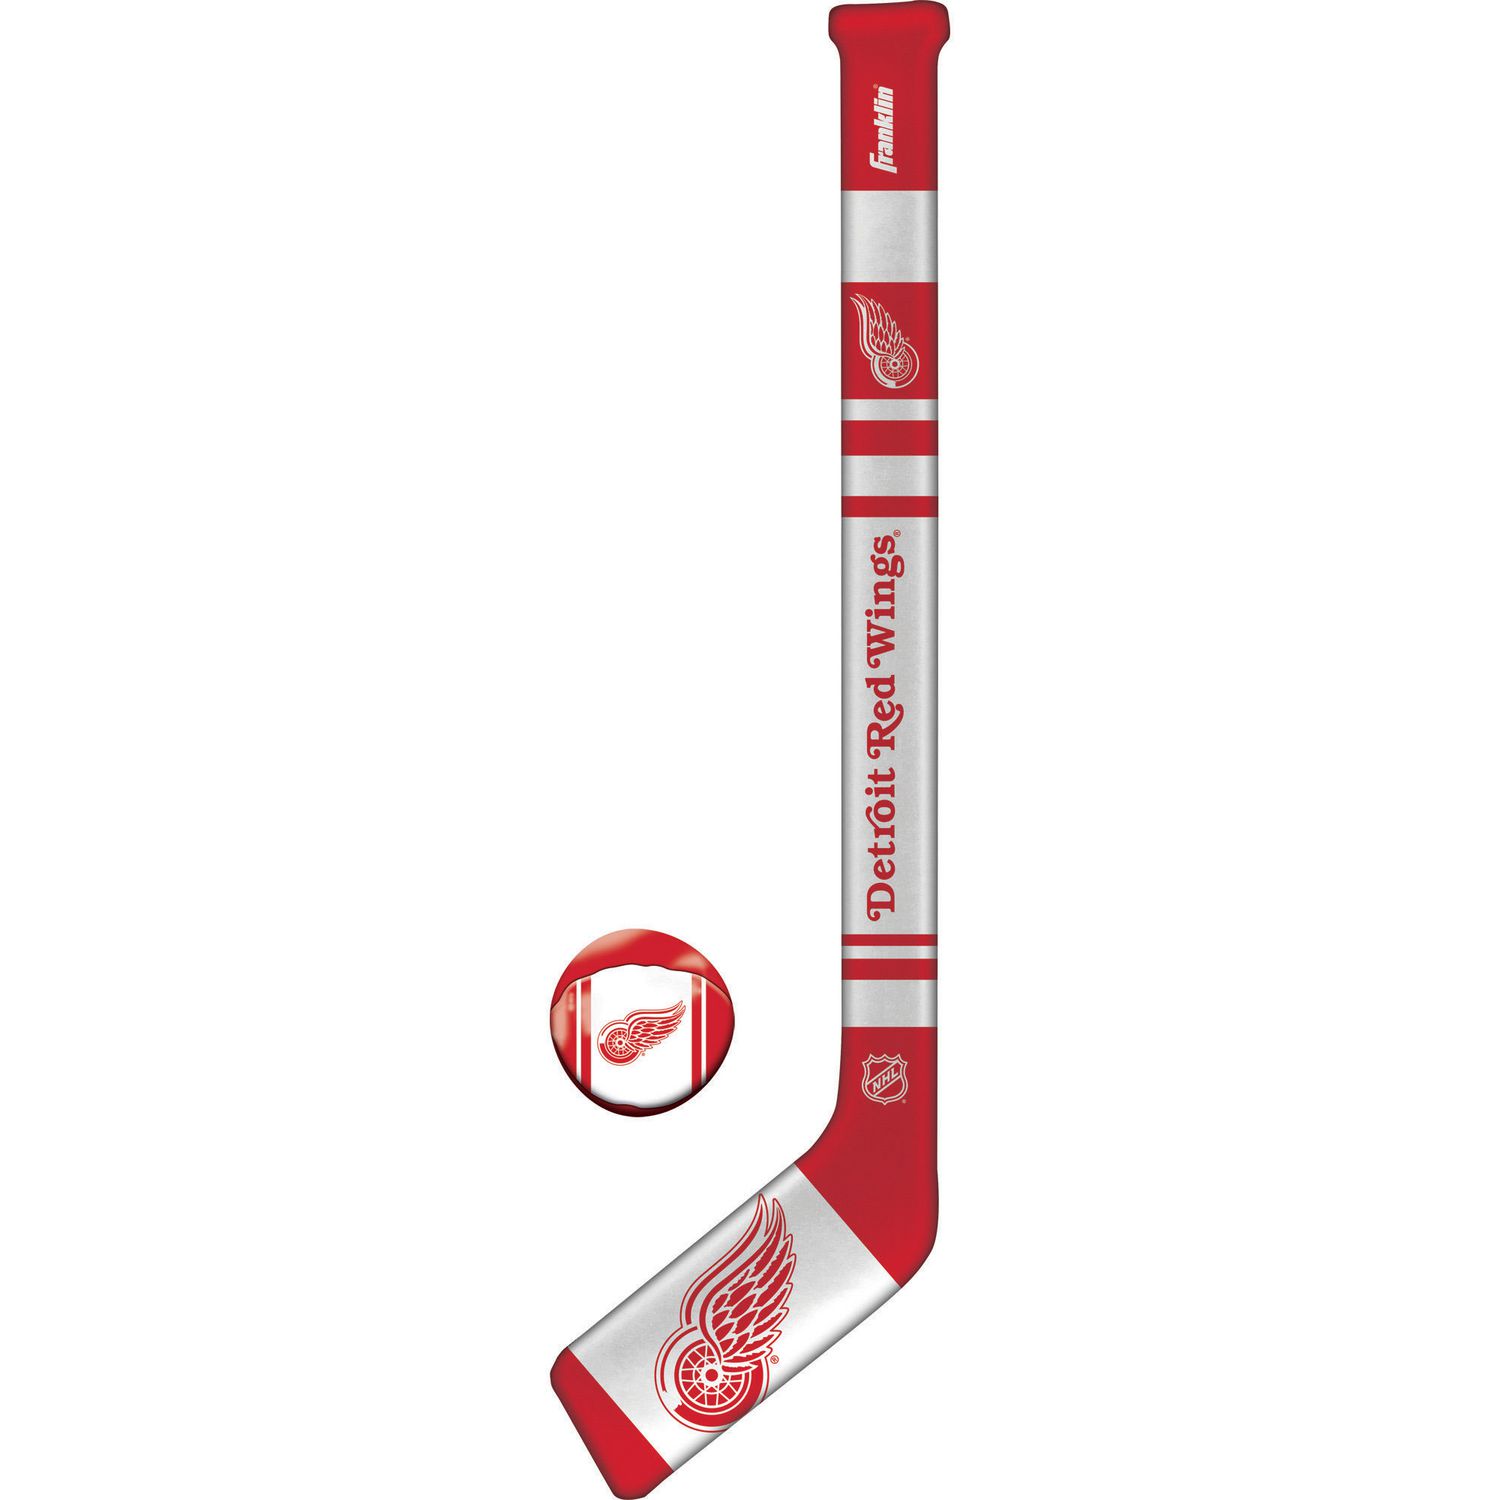 DETROIT RED WINGS OFFICIAL LOGO 24 MINI HOCKEY STICK 